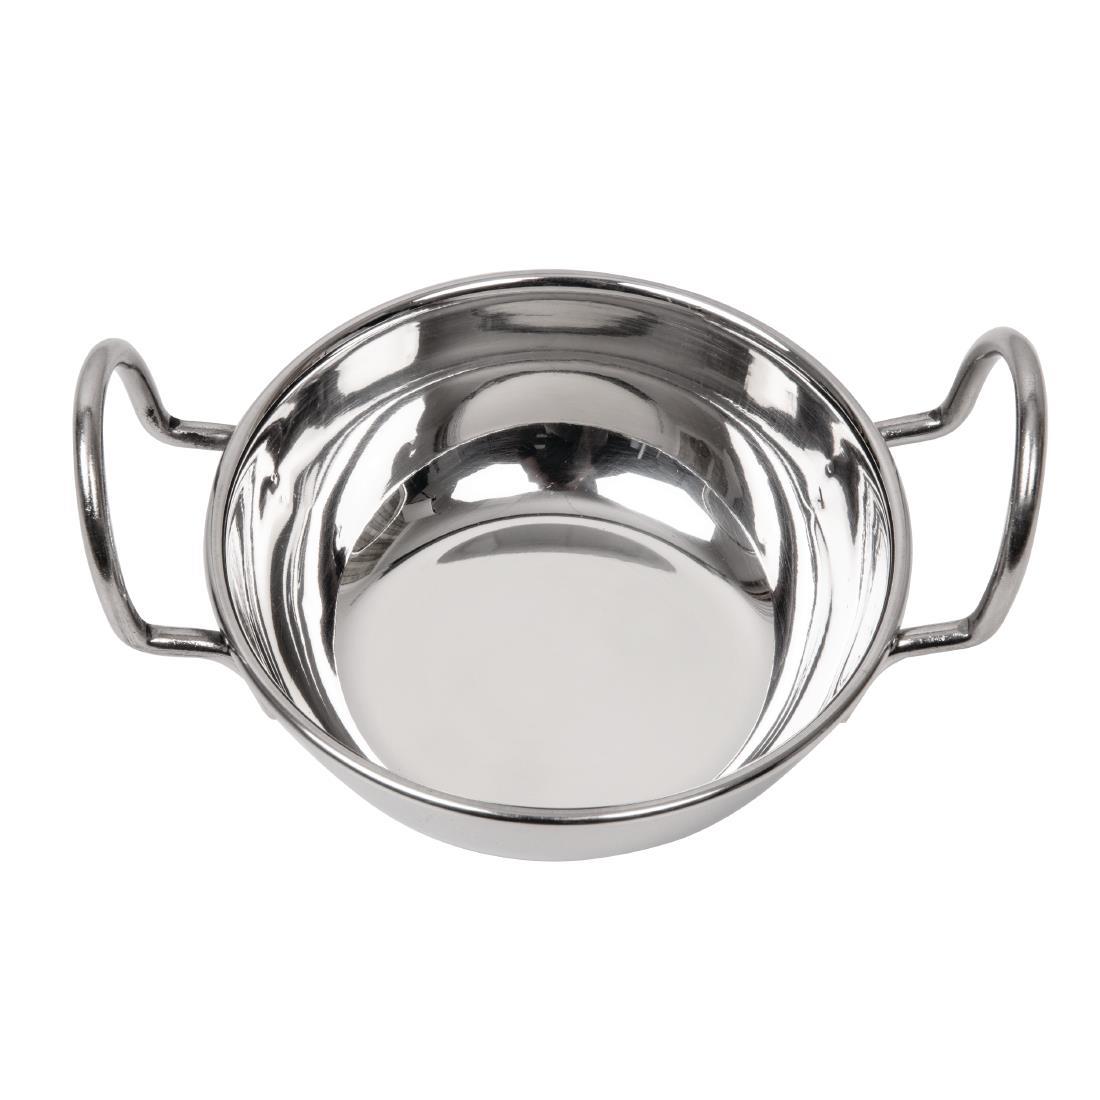 Balti Dipping Dish with Handles 100mm - CK580  - 1